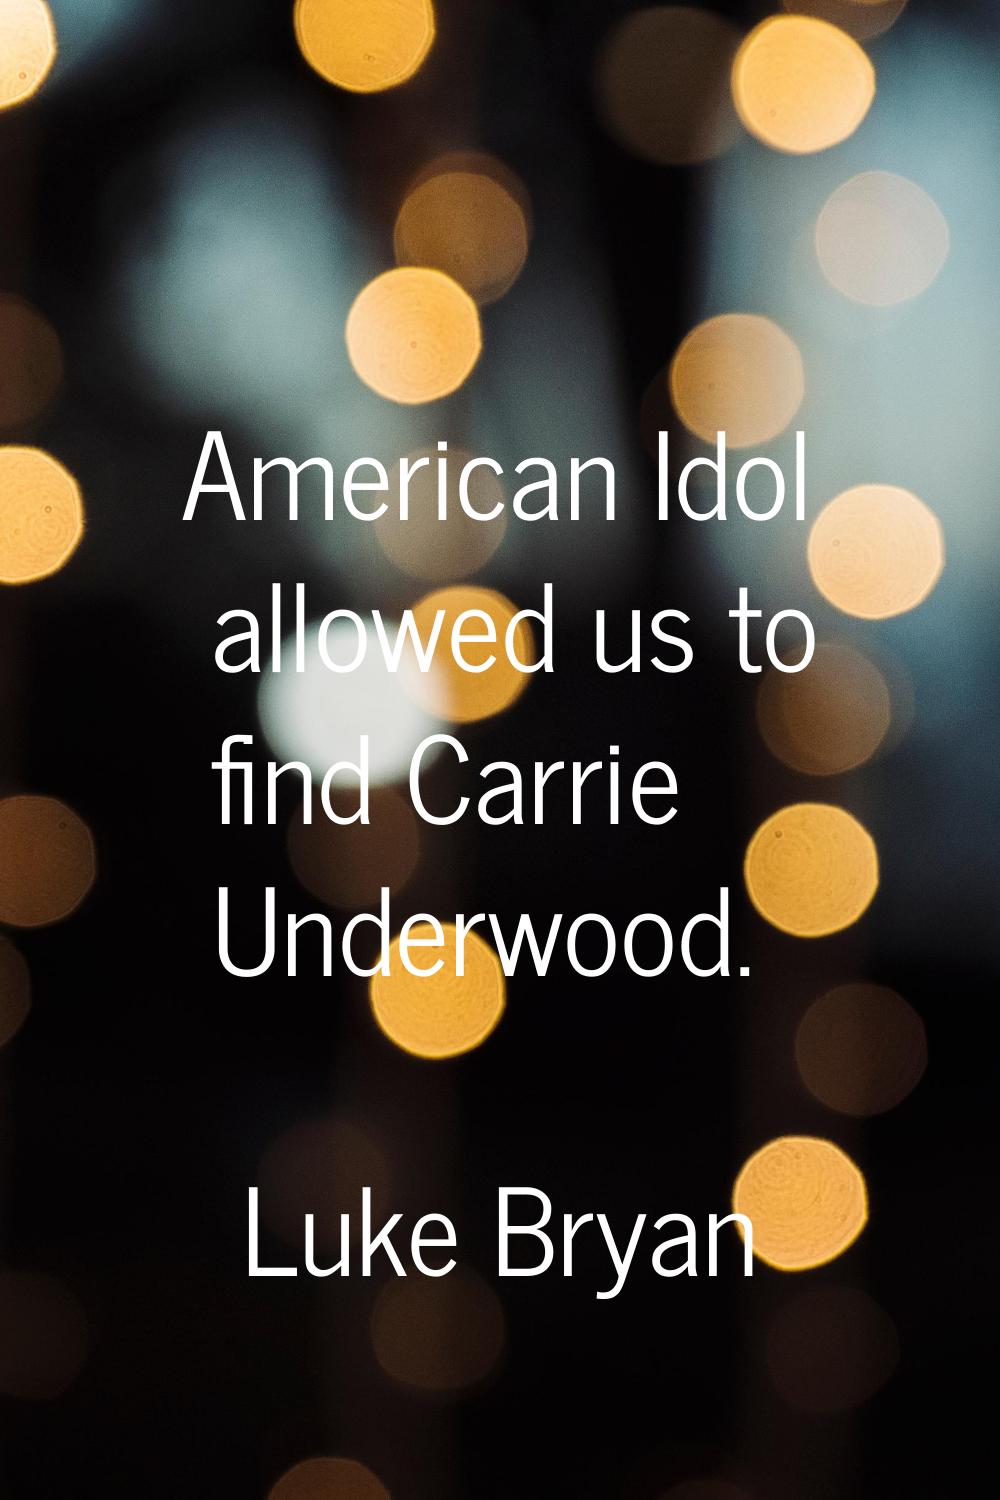 American Idol allowed us to find Carrie Underwood.